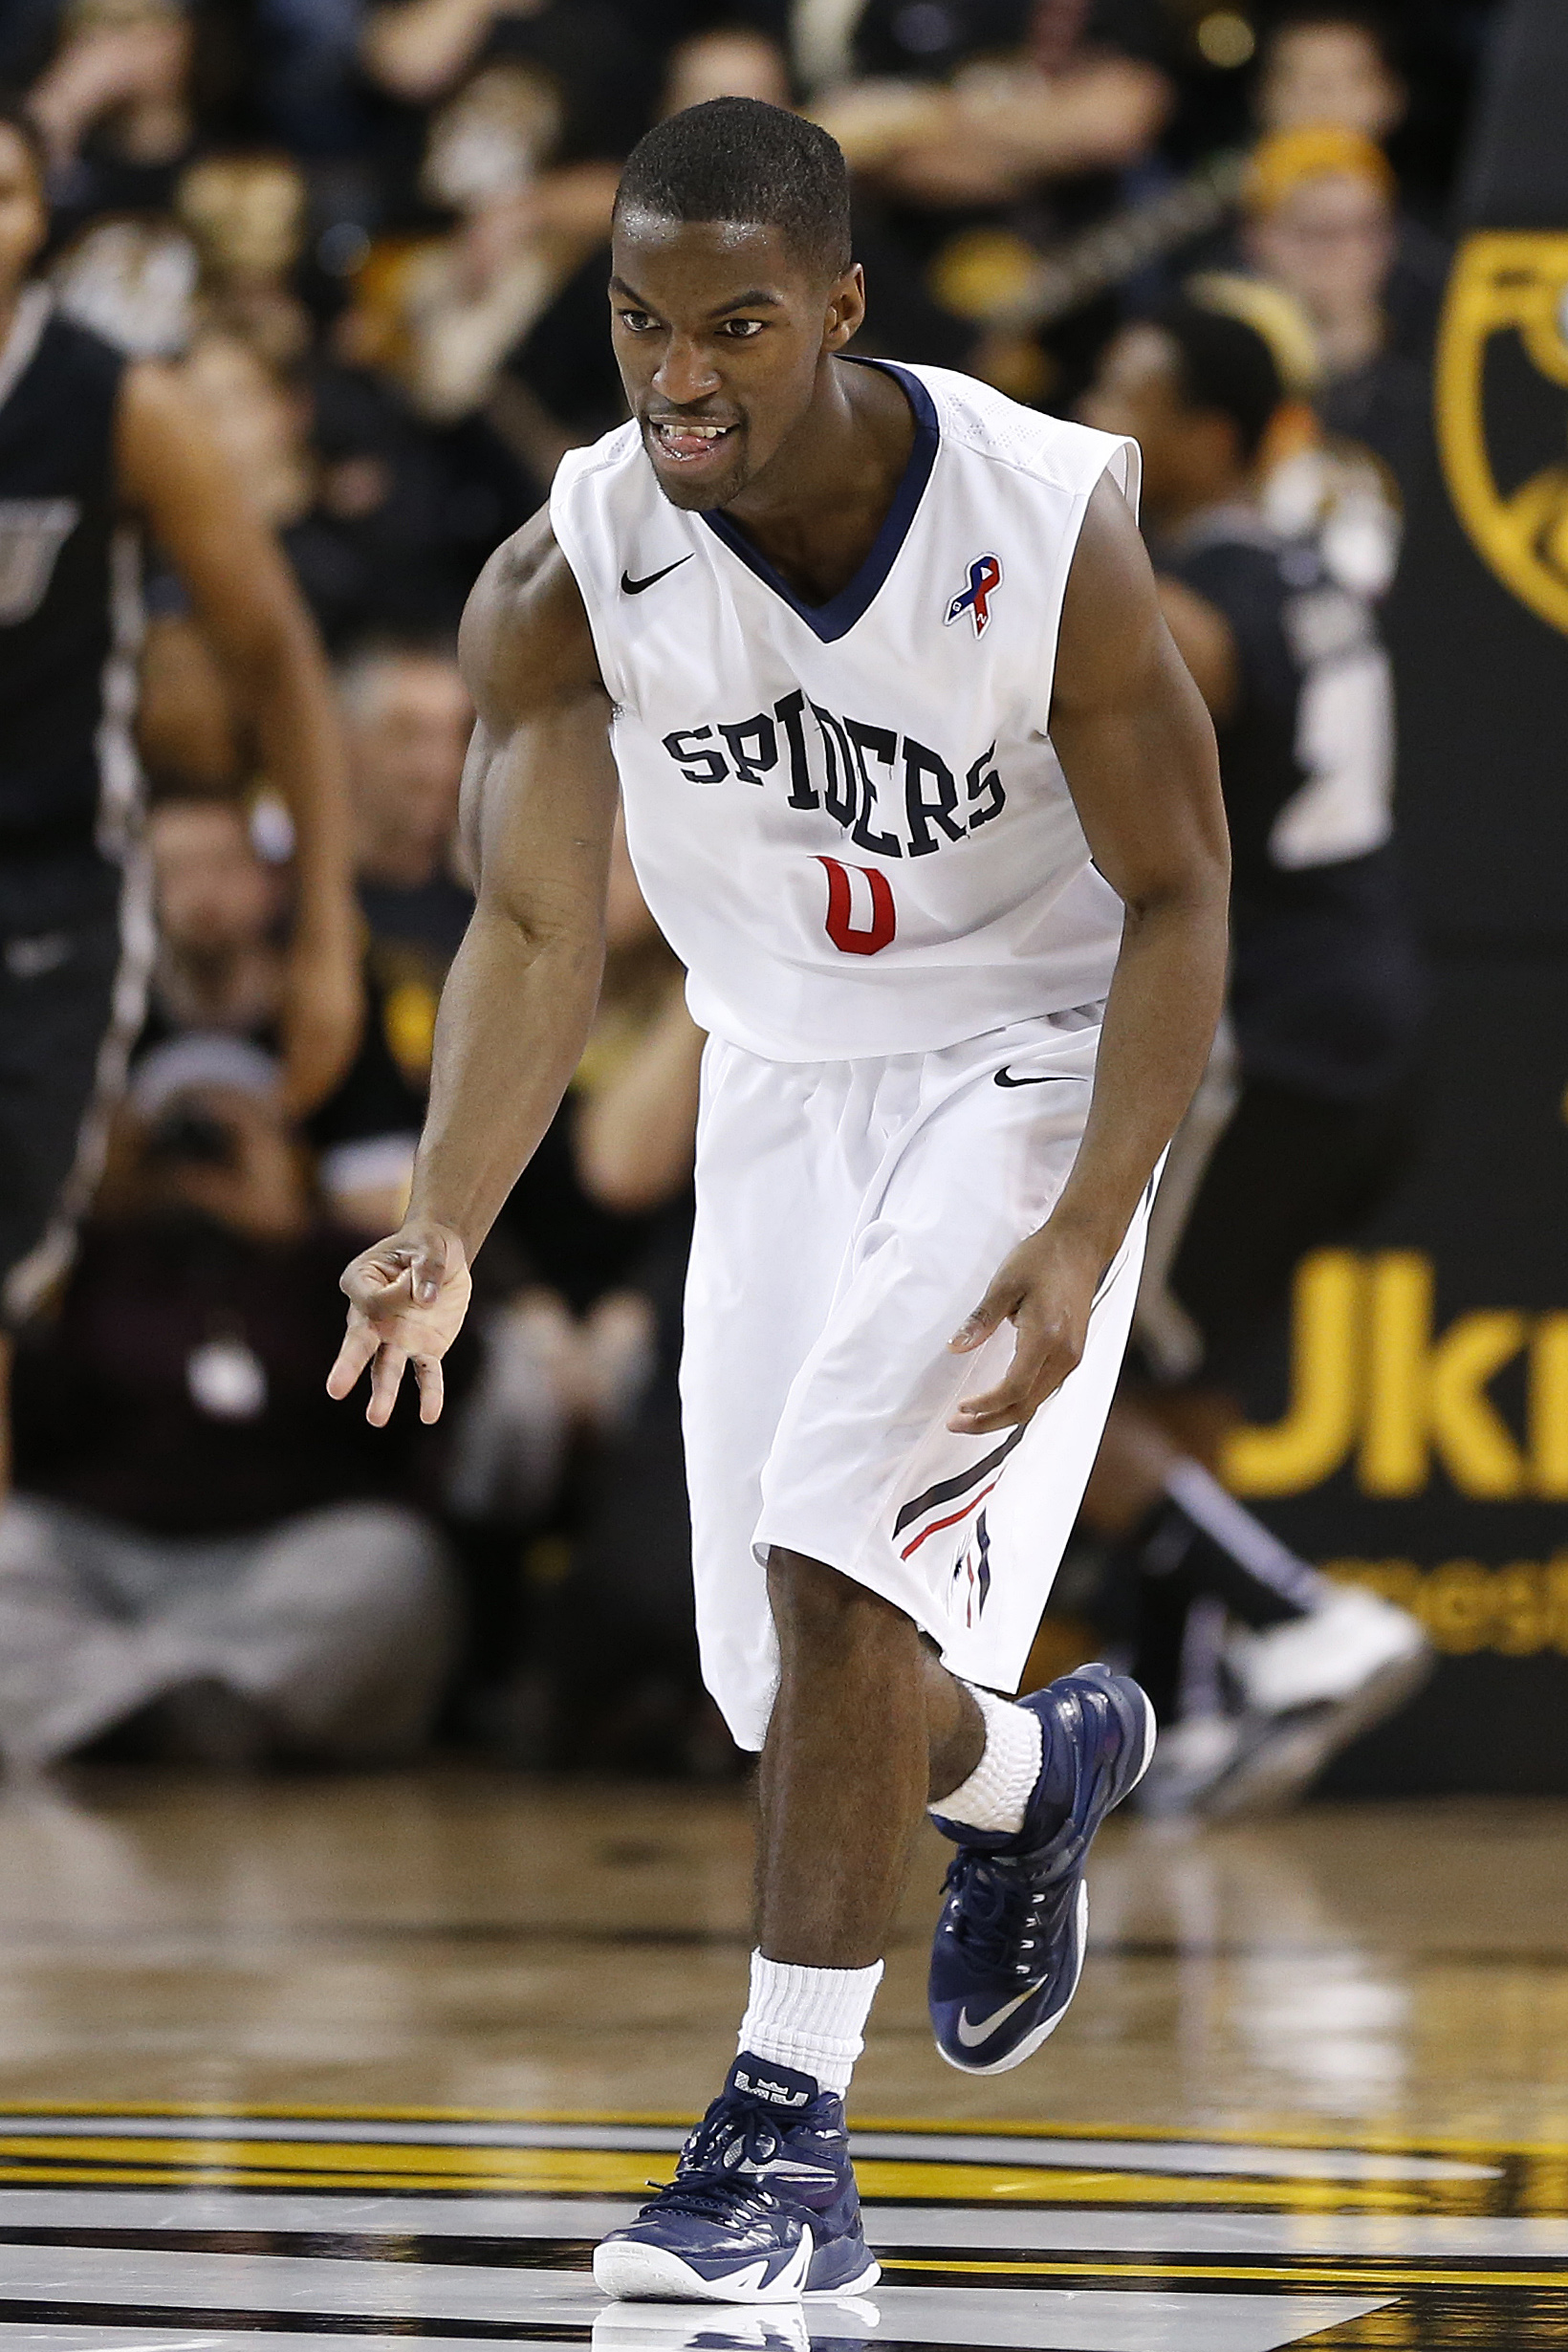 Kendall Anthony named Atlantic 10 Player of the Week - Pickin' Splinters